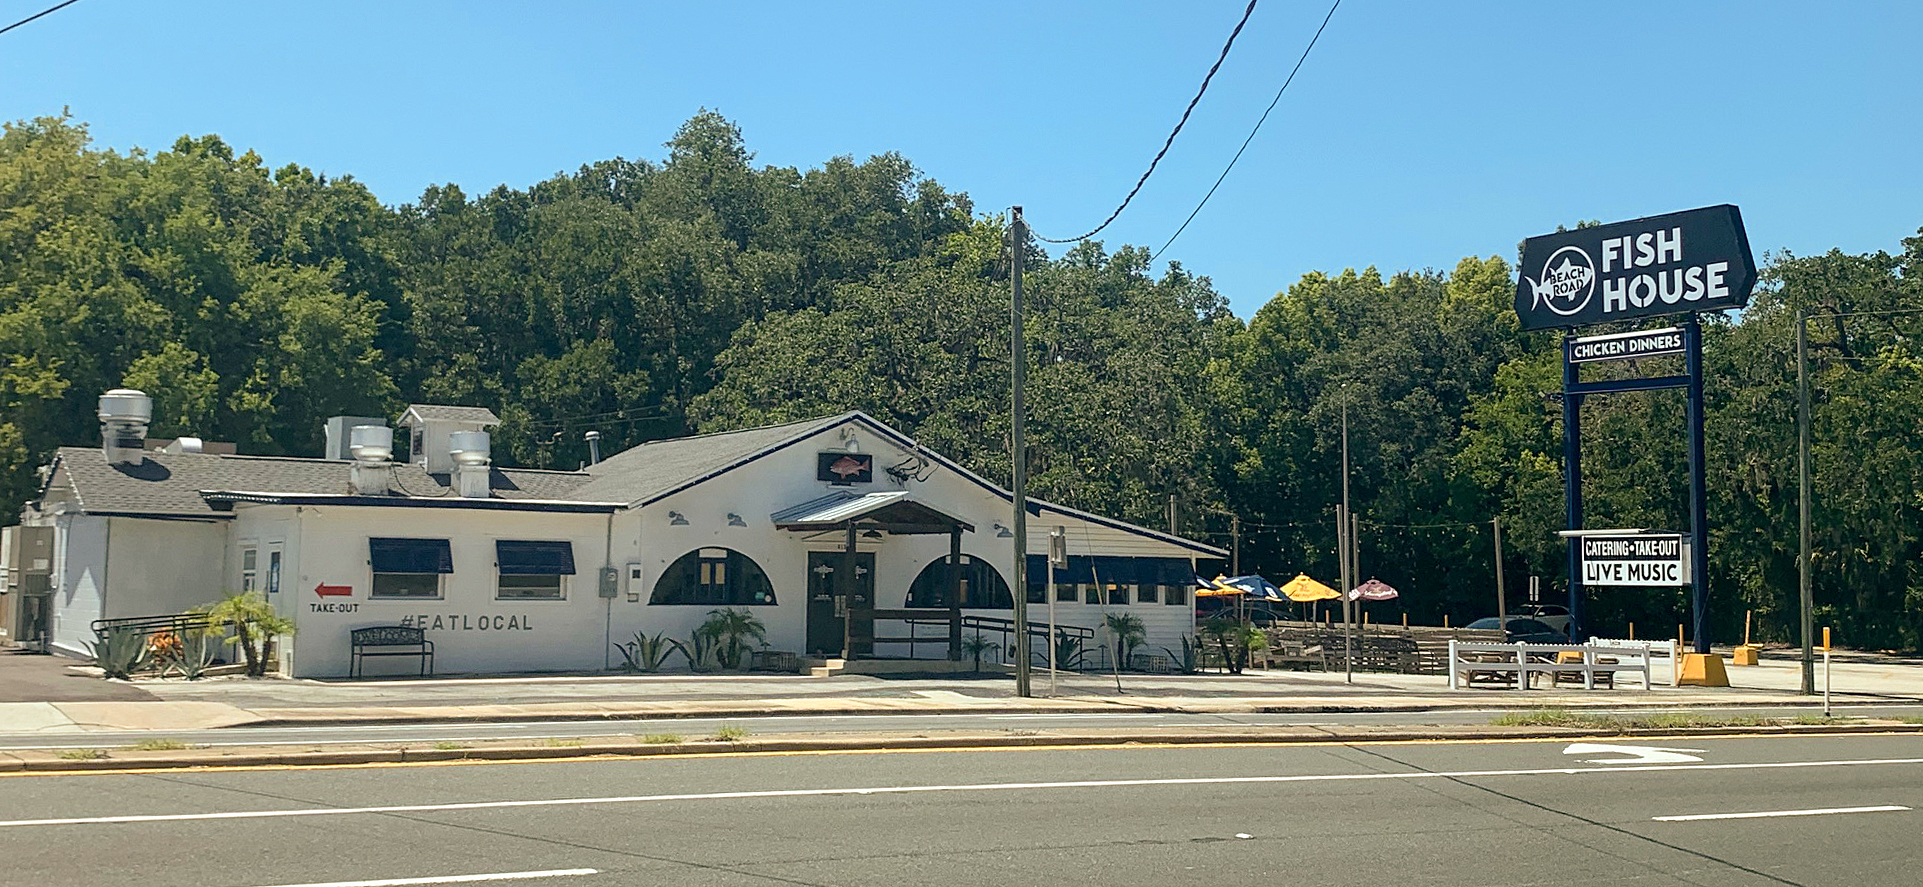 The owners of Beach Road Fish House & Chicken Dinners say they are paying more than $6,000 a month for power at the 4,400-square-foot restaurant.